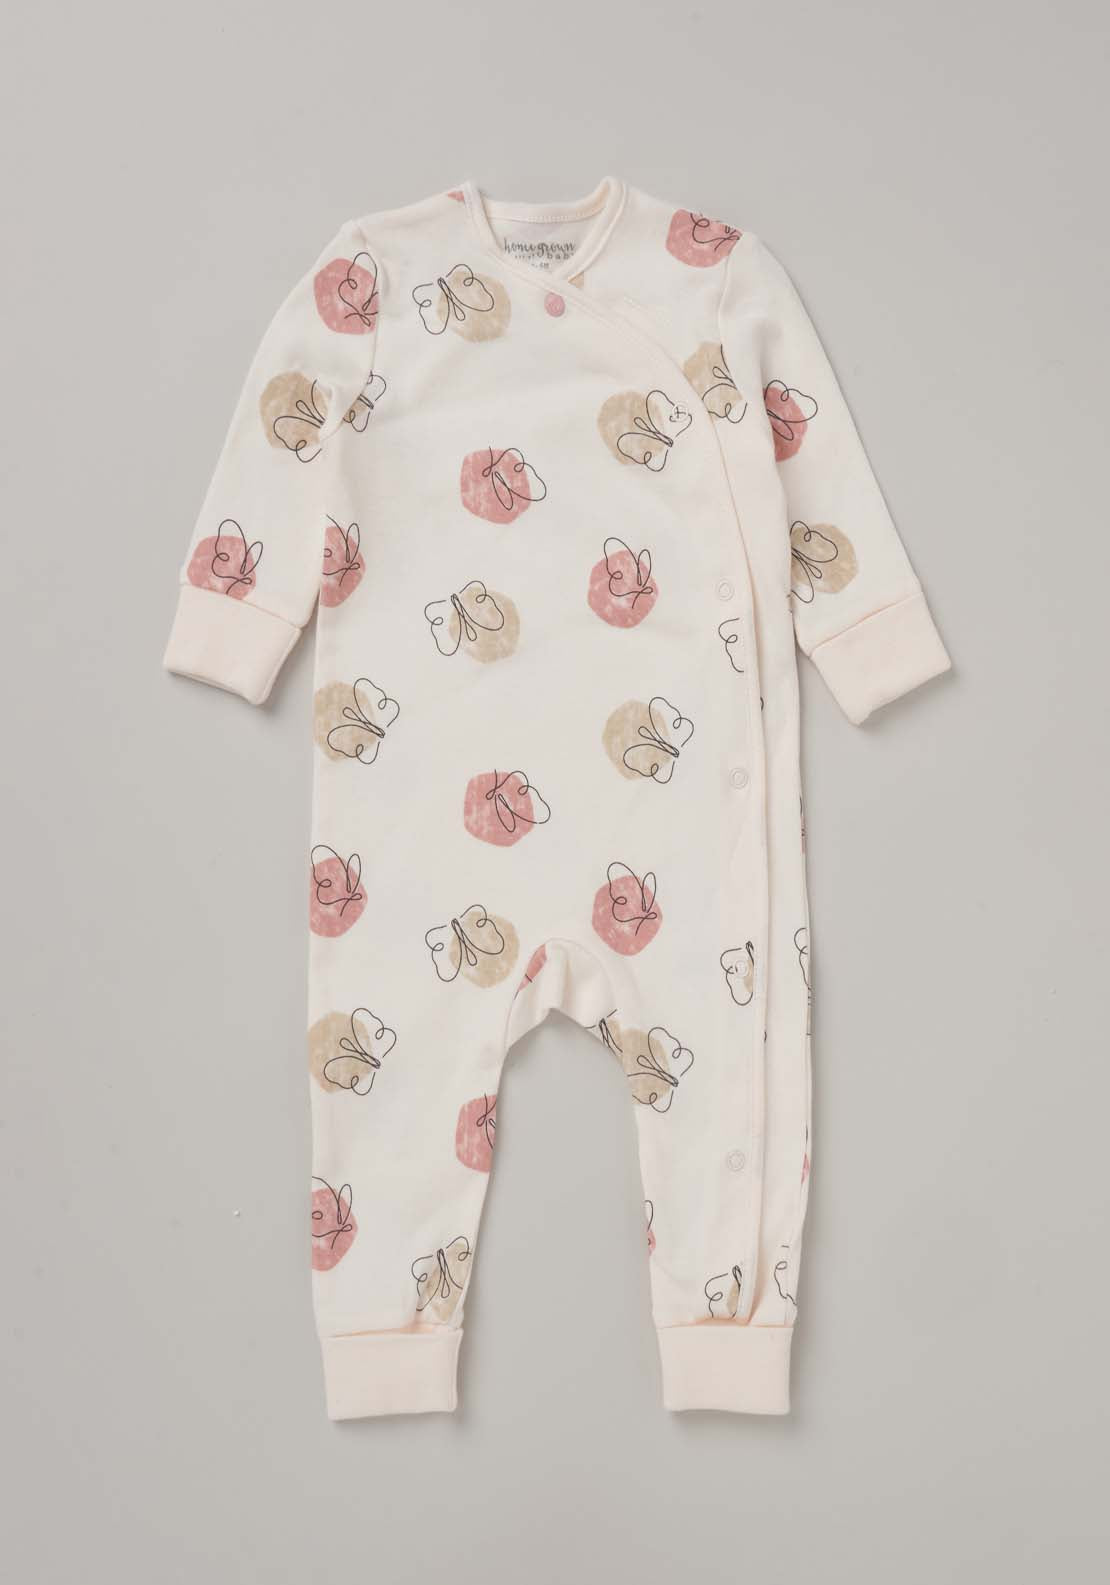 Jainco Baby Girl 5 Piece Butterfly Layette Set - Pink 2 Shaws Department Stores